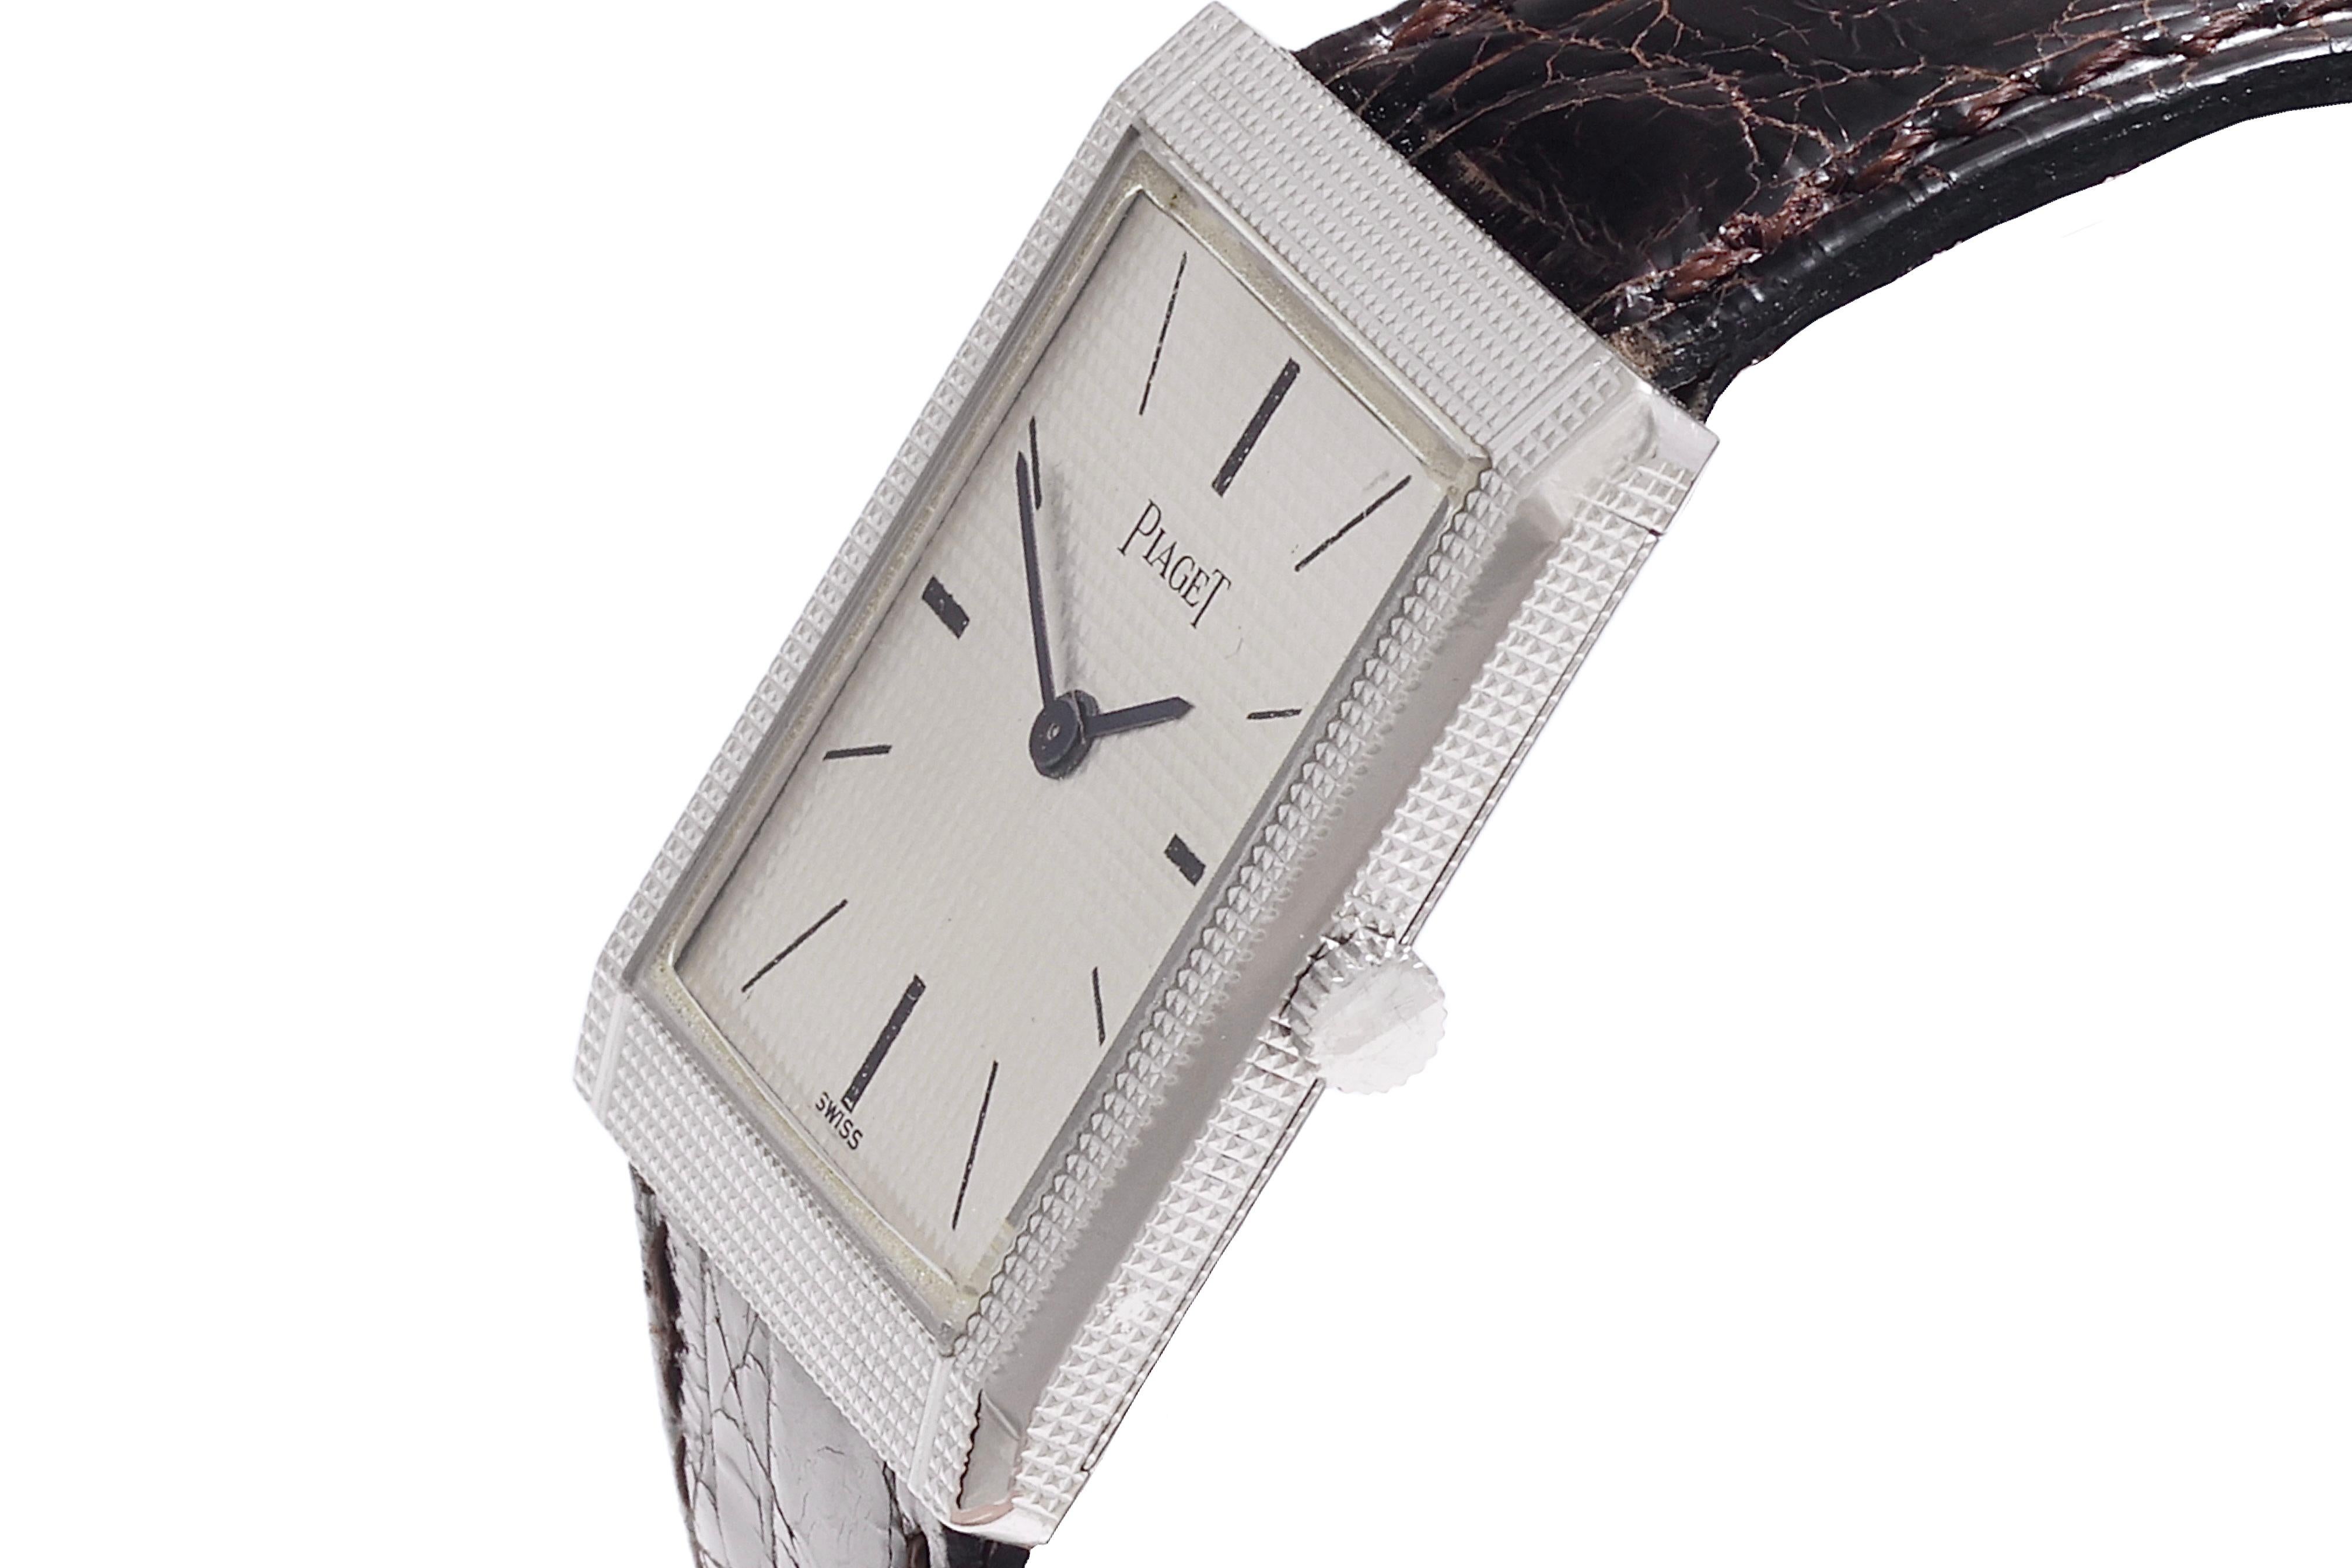 18 kt. White Gold Piaget Wrist Watch, Manual Winding Ultra Thin, Collectors In Excellent Condition For Sale In Antwerp, BE